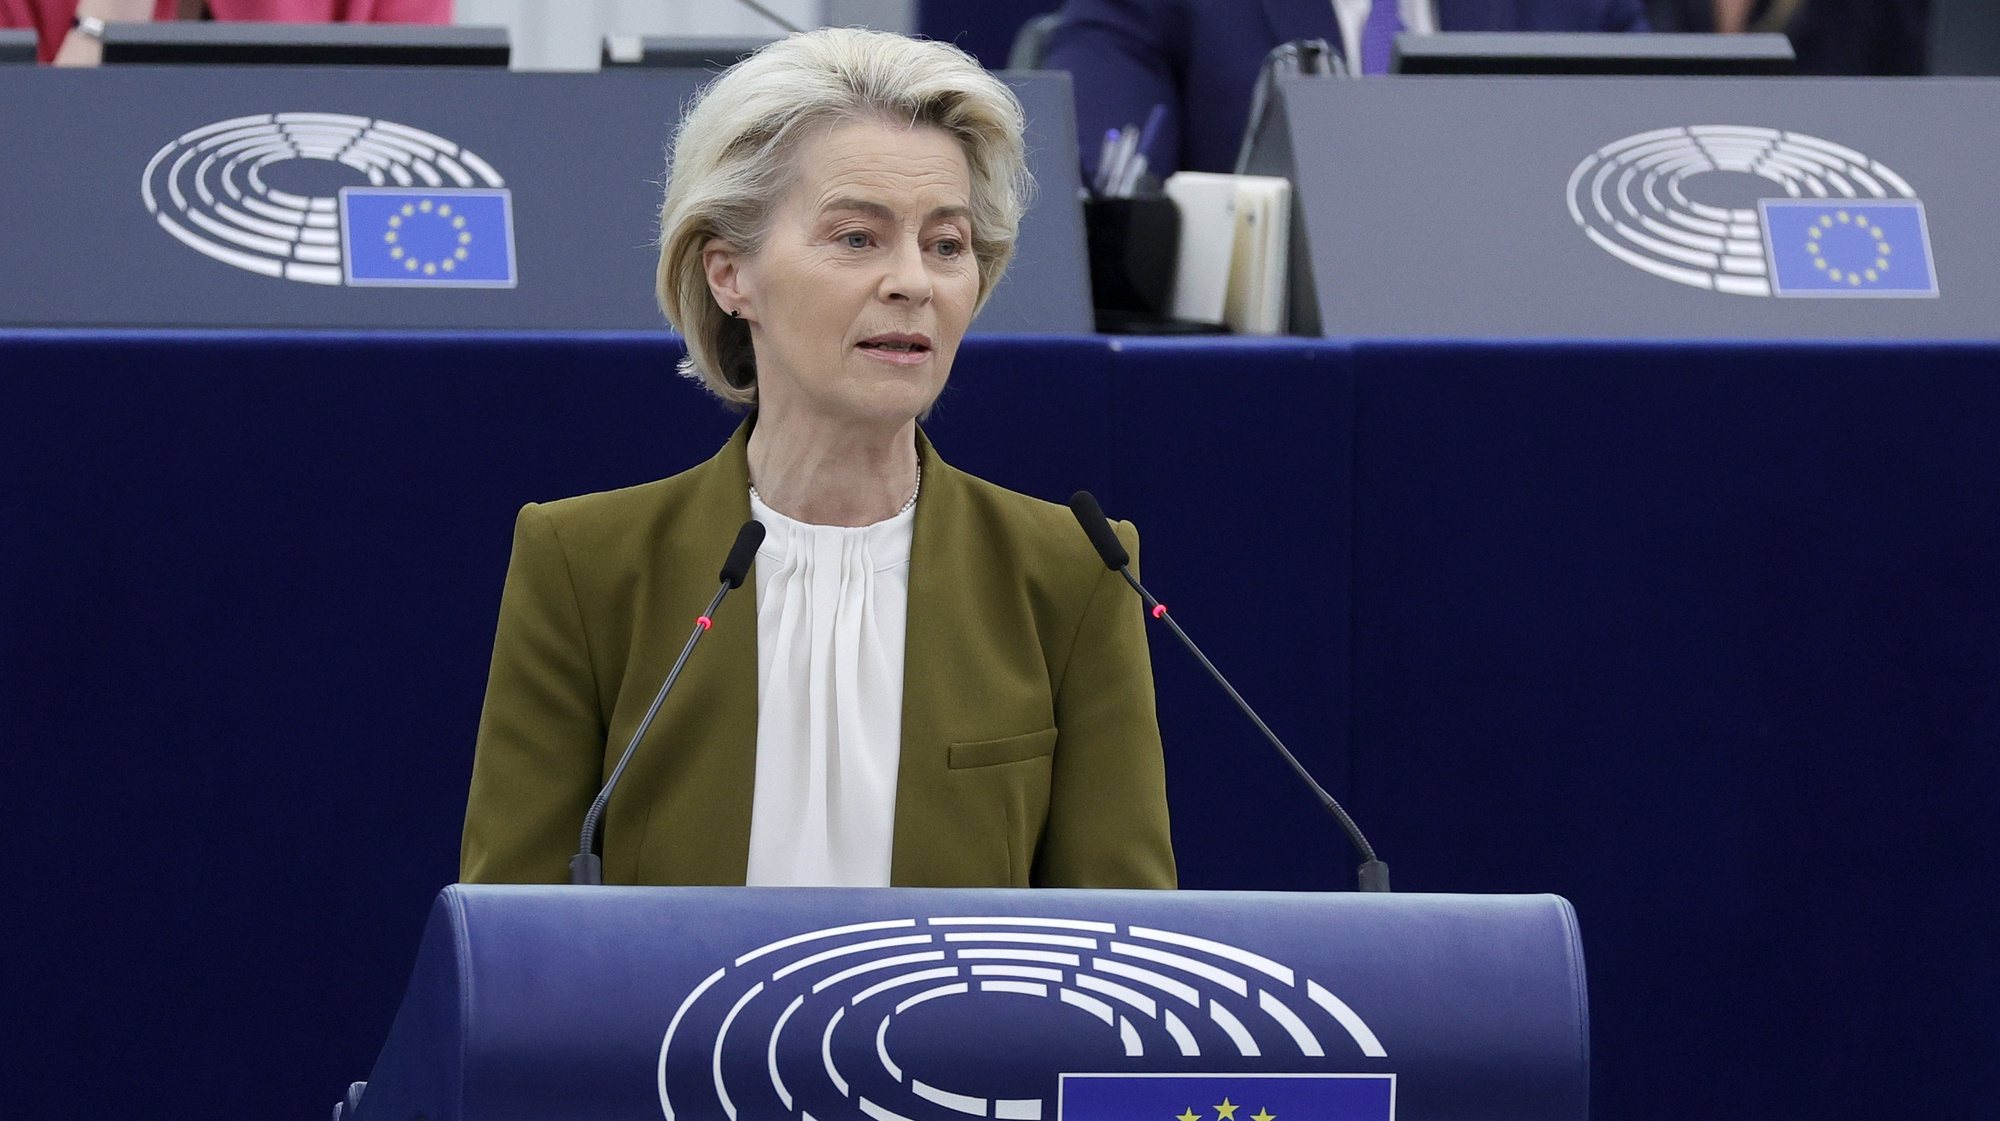 epa11297253 European Commission President Ursula von der Leyen delivers a speech during a formal sitting on the 20th anniversary of the 2004 EU Enlargement at the European Parliament in Strasbourg, France, 24 April 2024. The EU Parliament&#039;s current plenary session runs from 22 until 25 April 2024.  EPA/RONALD WITTEK